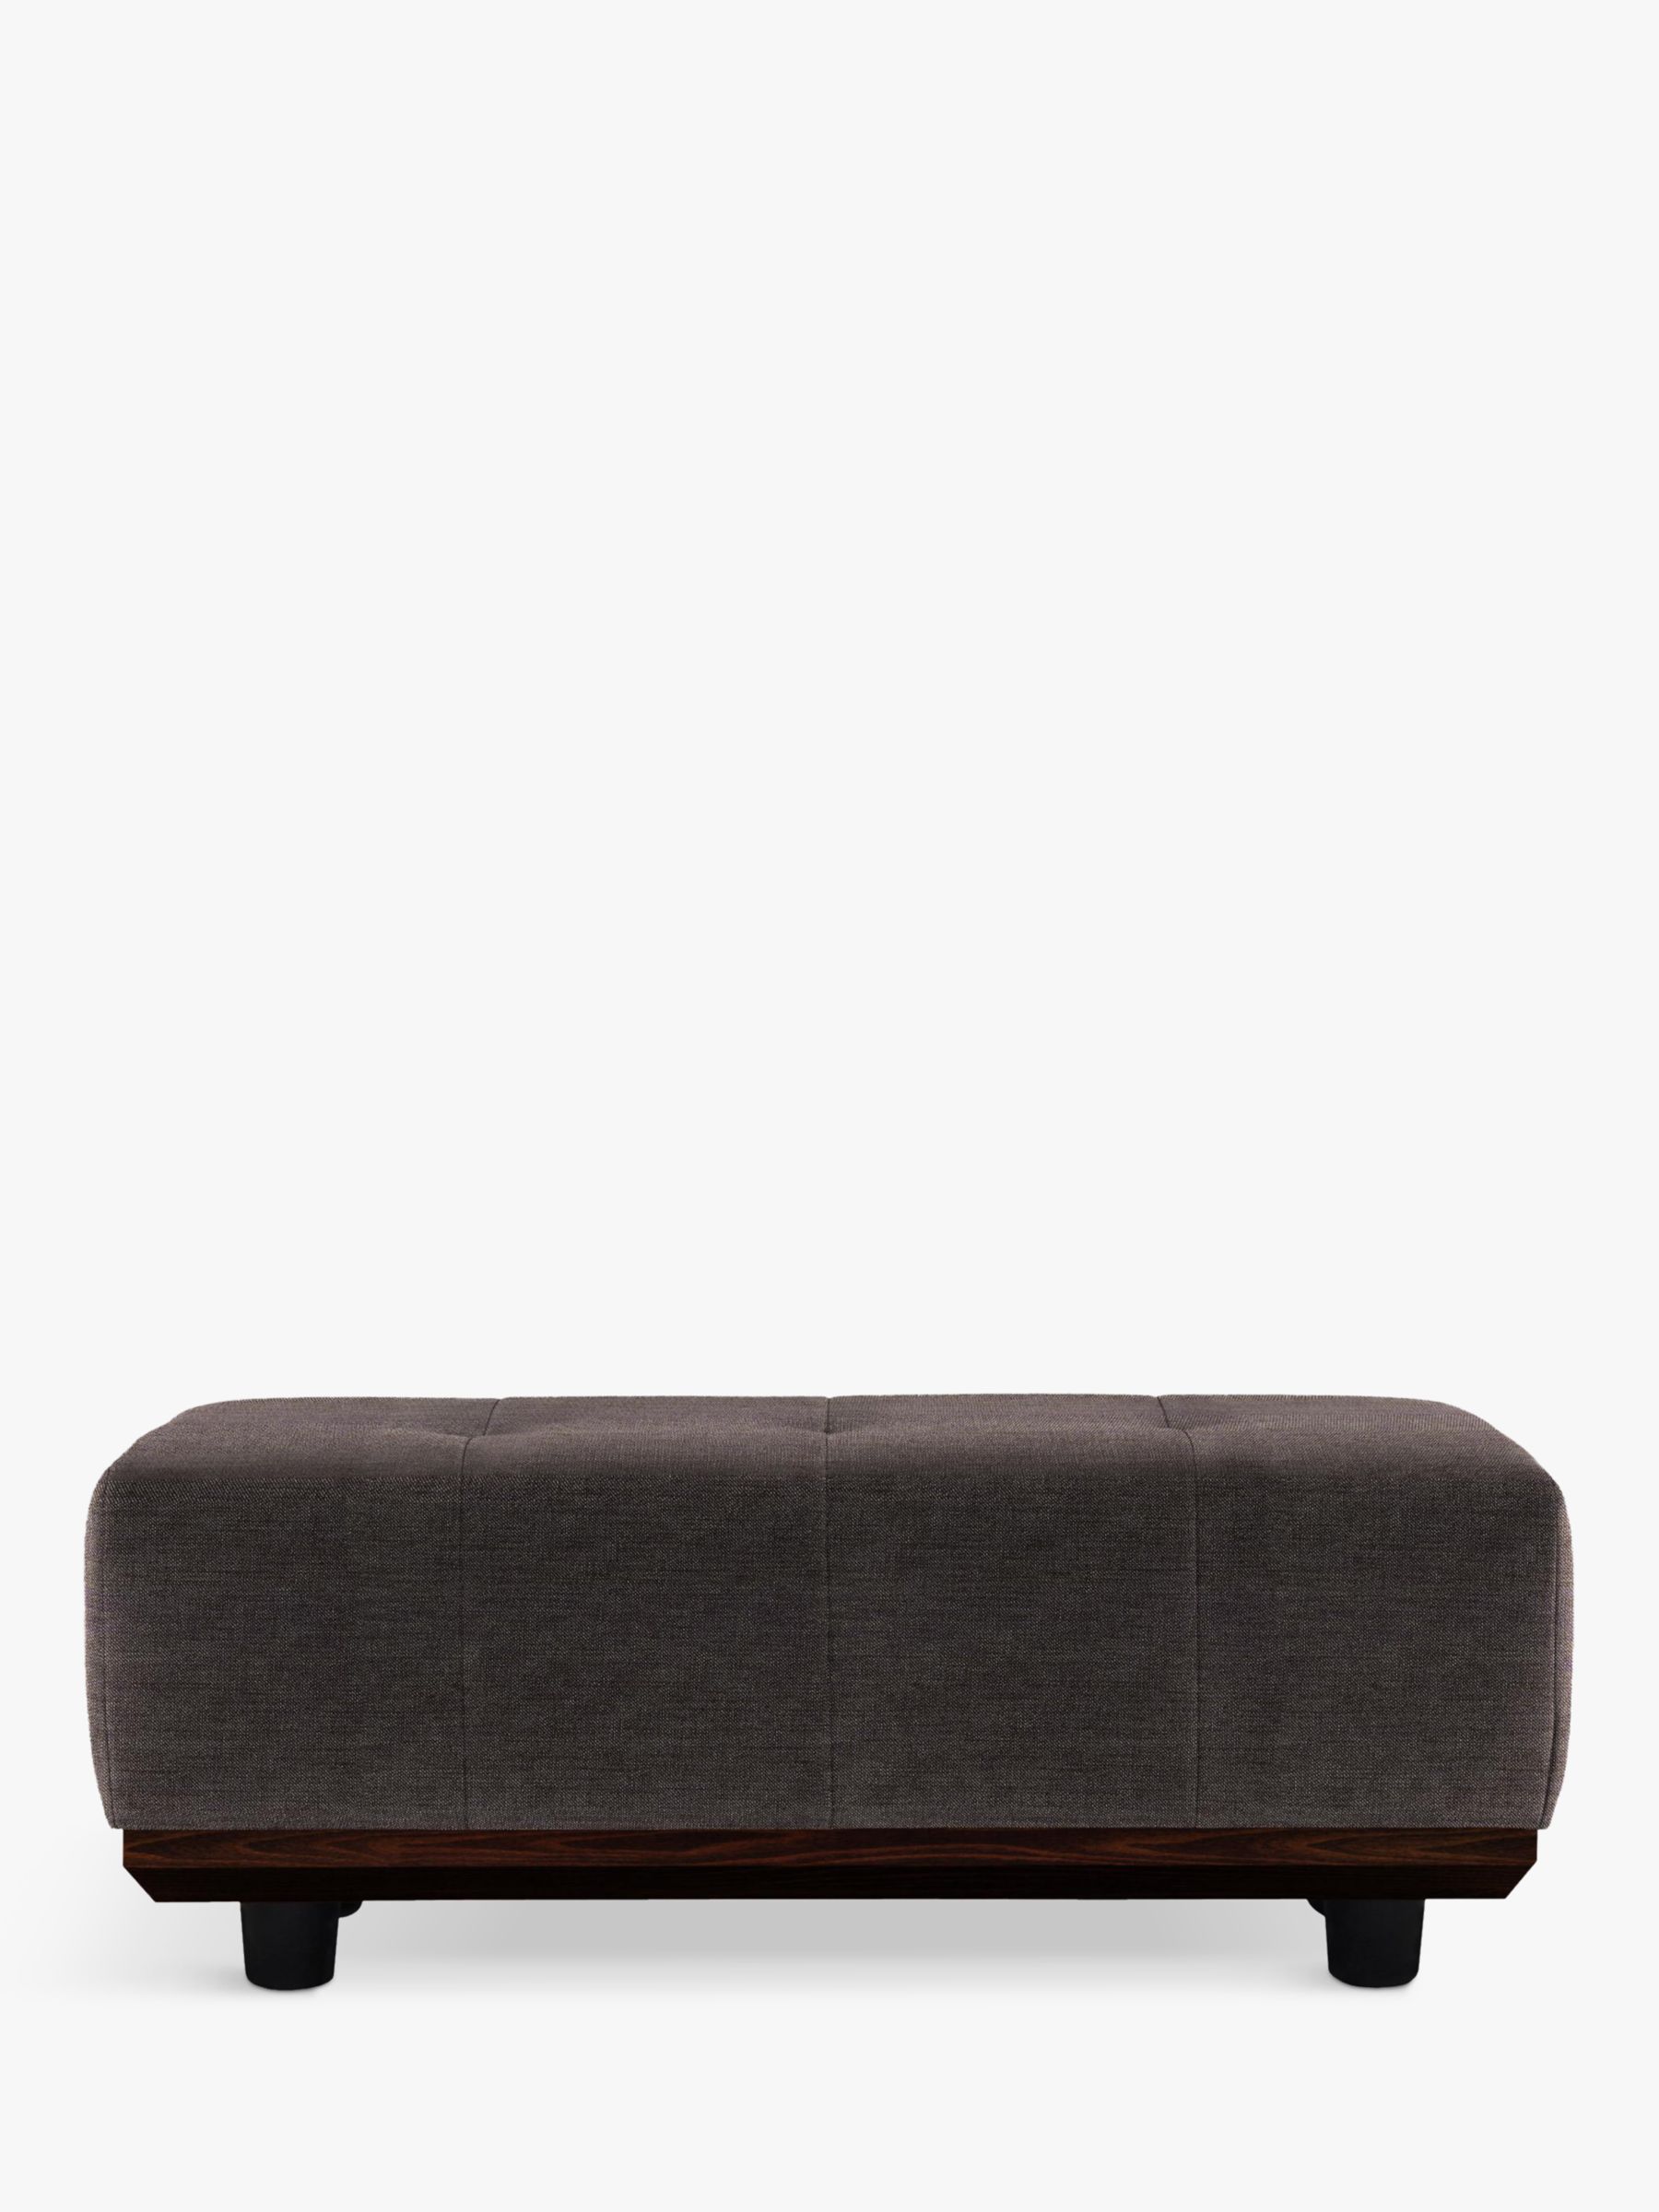 The Seventy One Range, G Plan Vintage The Seventy One Footstool, Tonic Charcoal